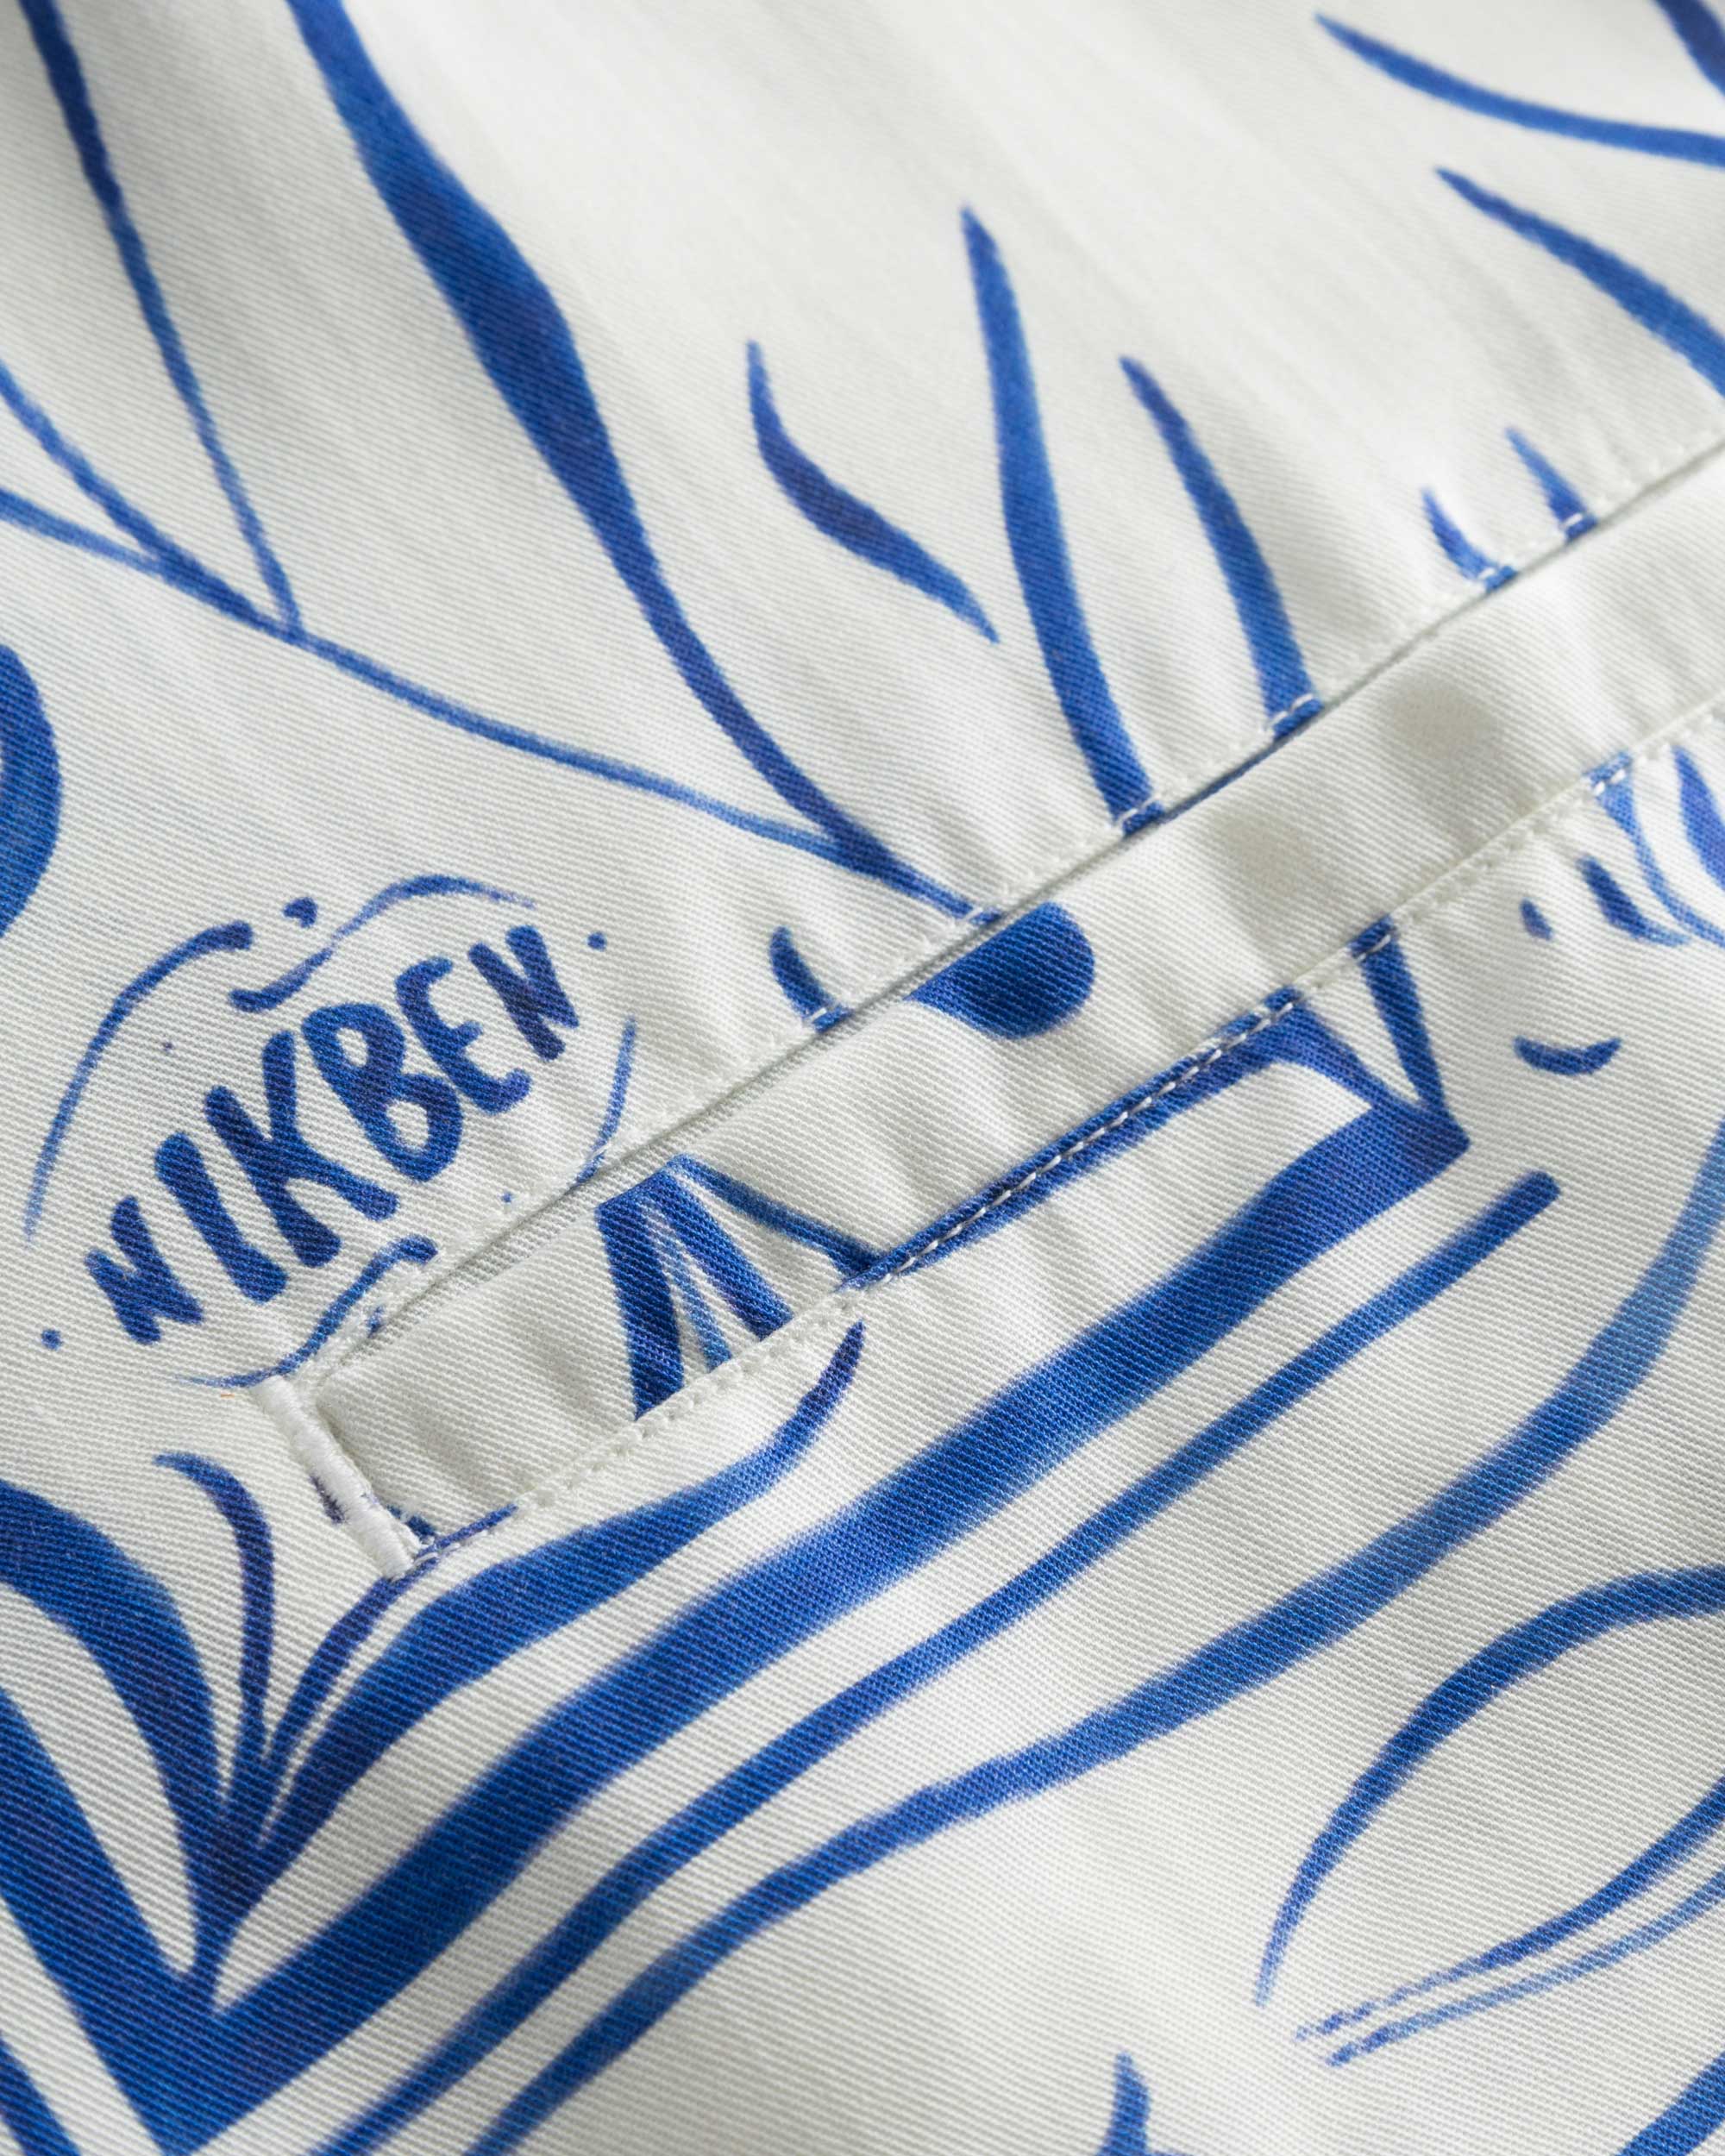 Close-up of the breast pocket on a white short-sleeved vacation shirt with blue graphic pattern